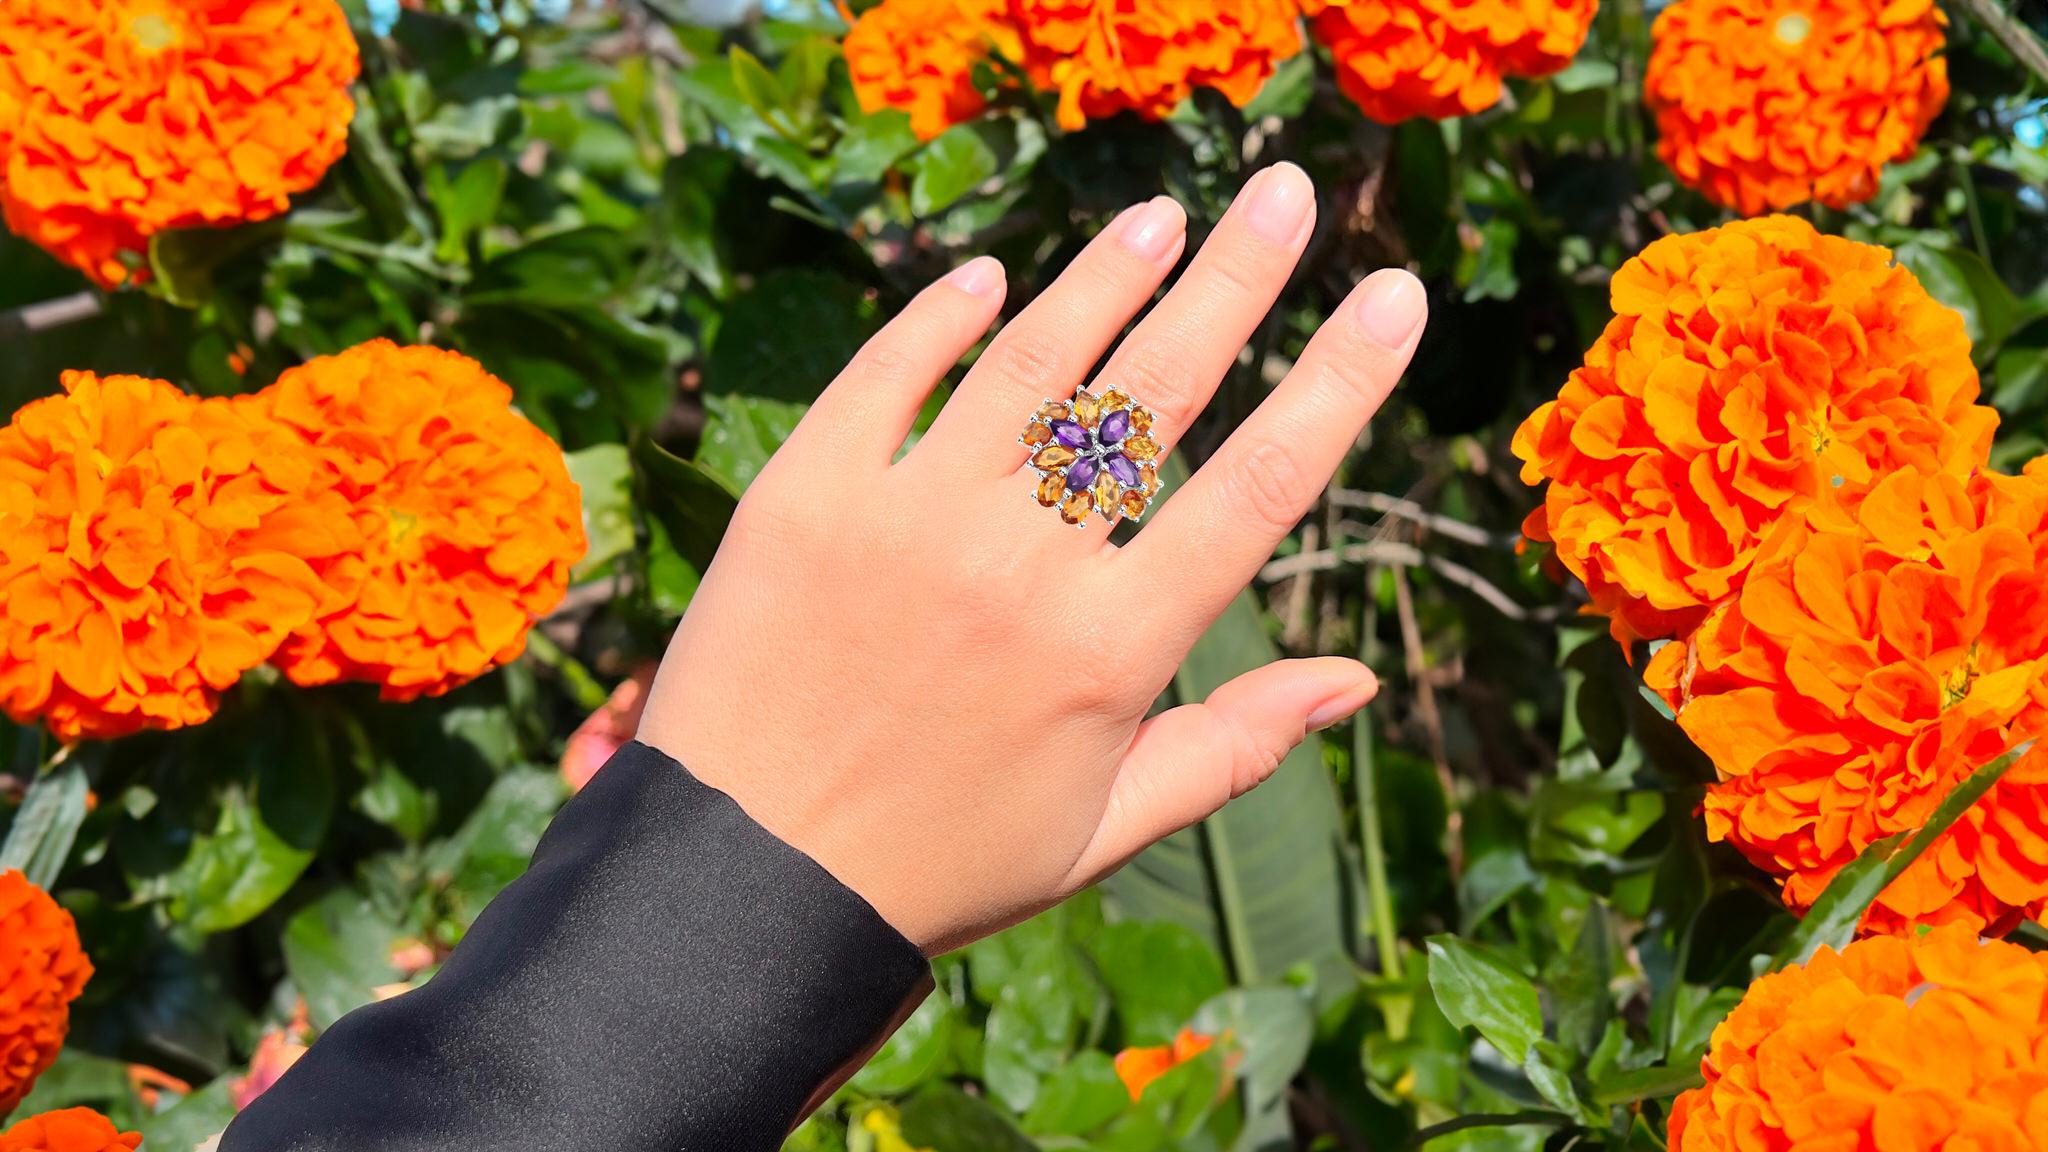 It comes with the Gemological Appraisal by GIA GG/AJP
All Gemstones are Natural
Madeira Citrines = 5.85 Carats
Cut: Marquise, Oval
Amethysts = 2.15 Carats
Cut: Marquise
Metal: Rhodium Plated Sterling Silver
Ring Size: 6* US
*It can be resized